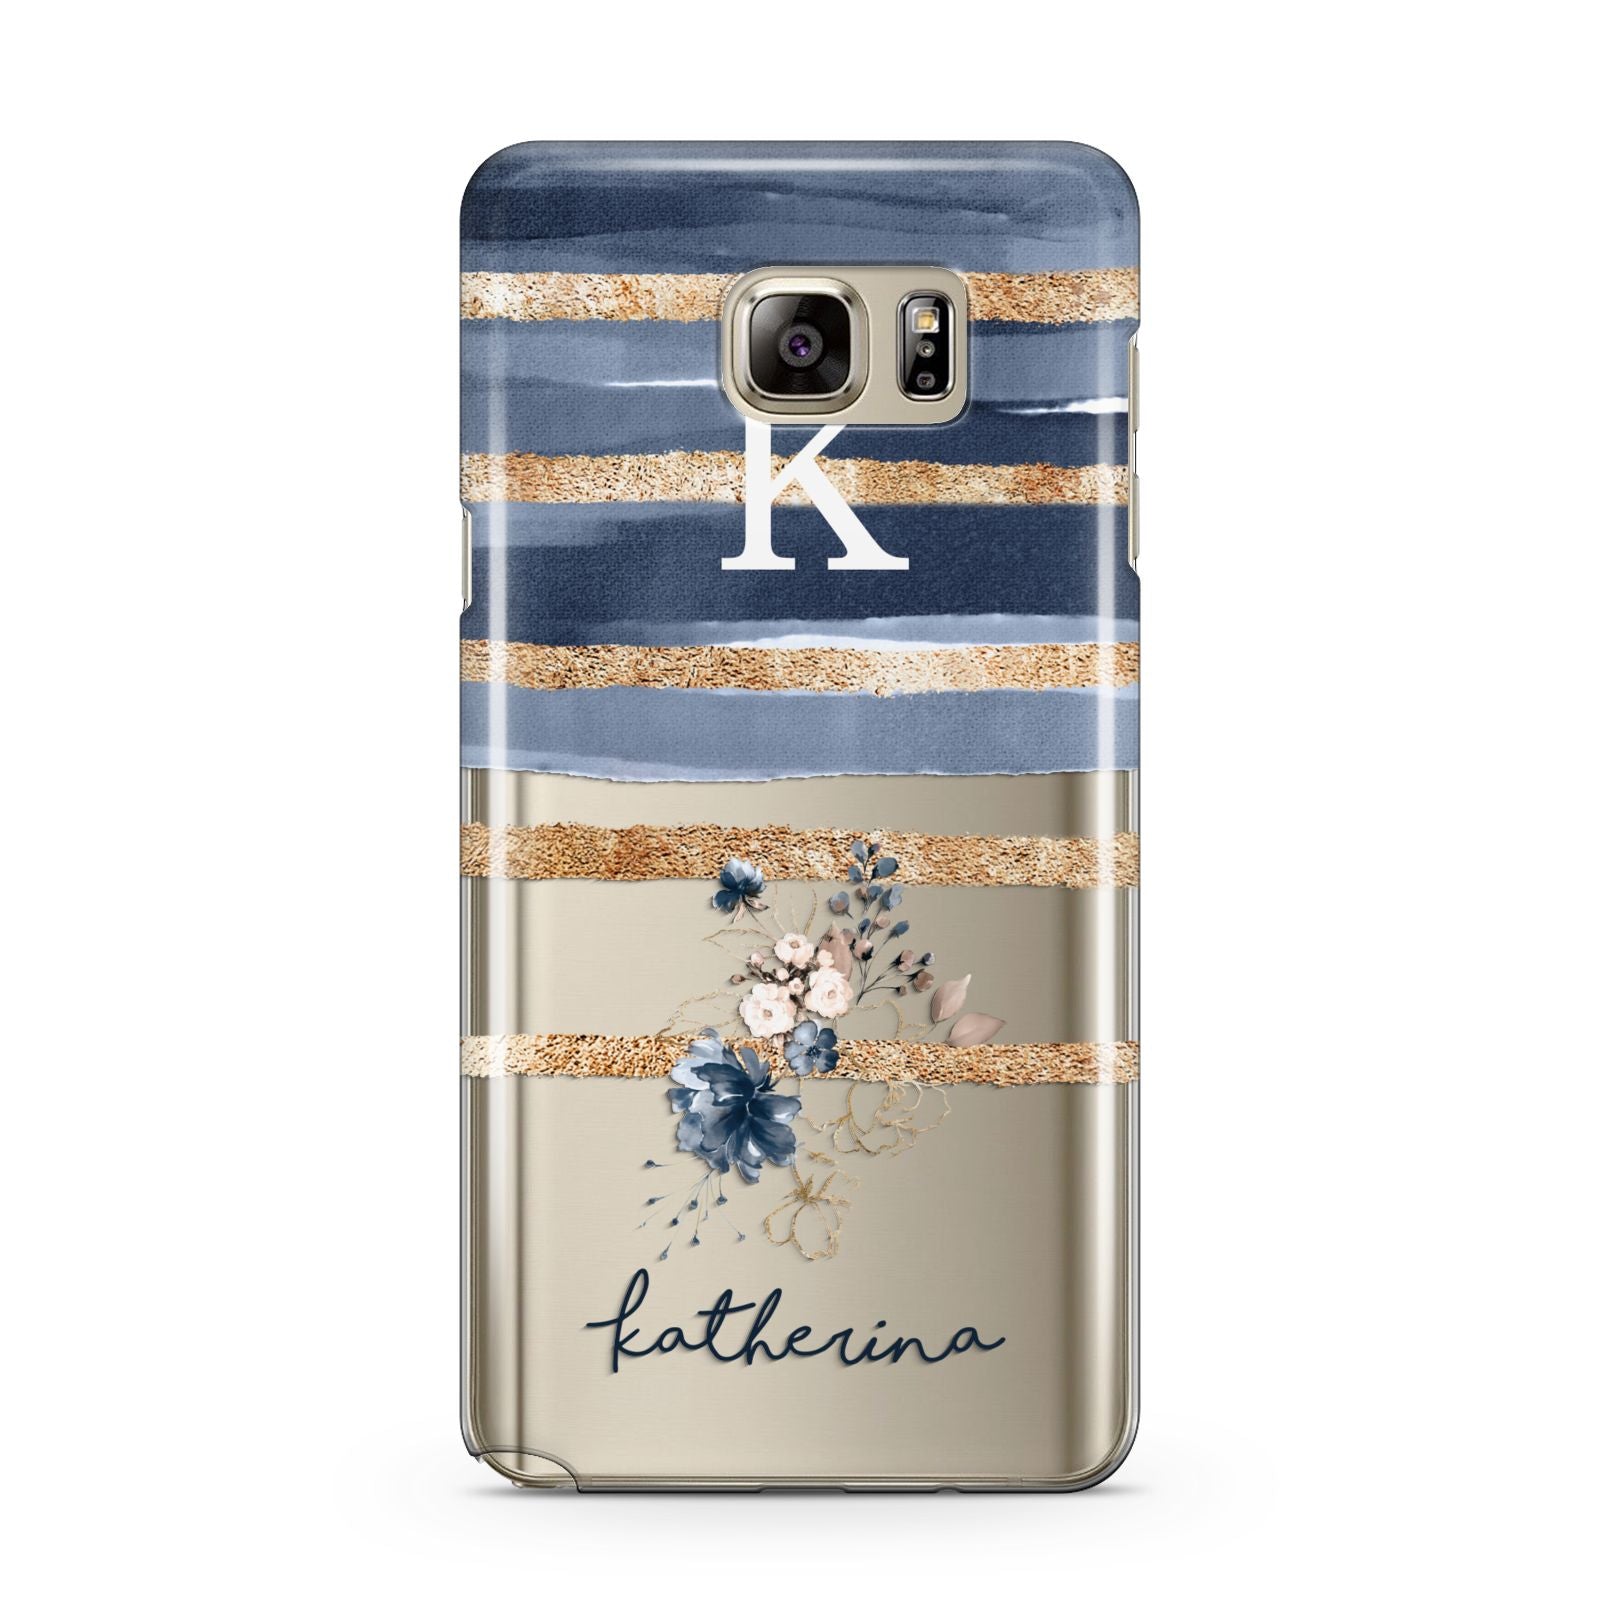 Personalised Gold Striped Watercolour Samsung Galaxy Note 5 Case